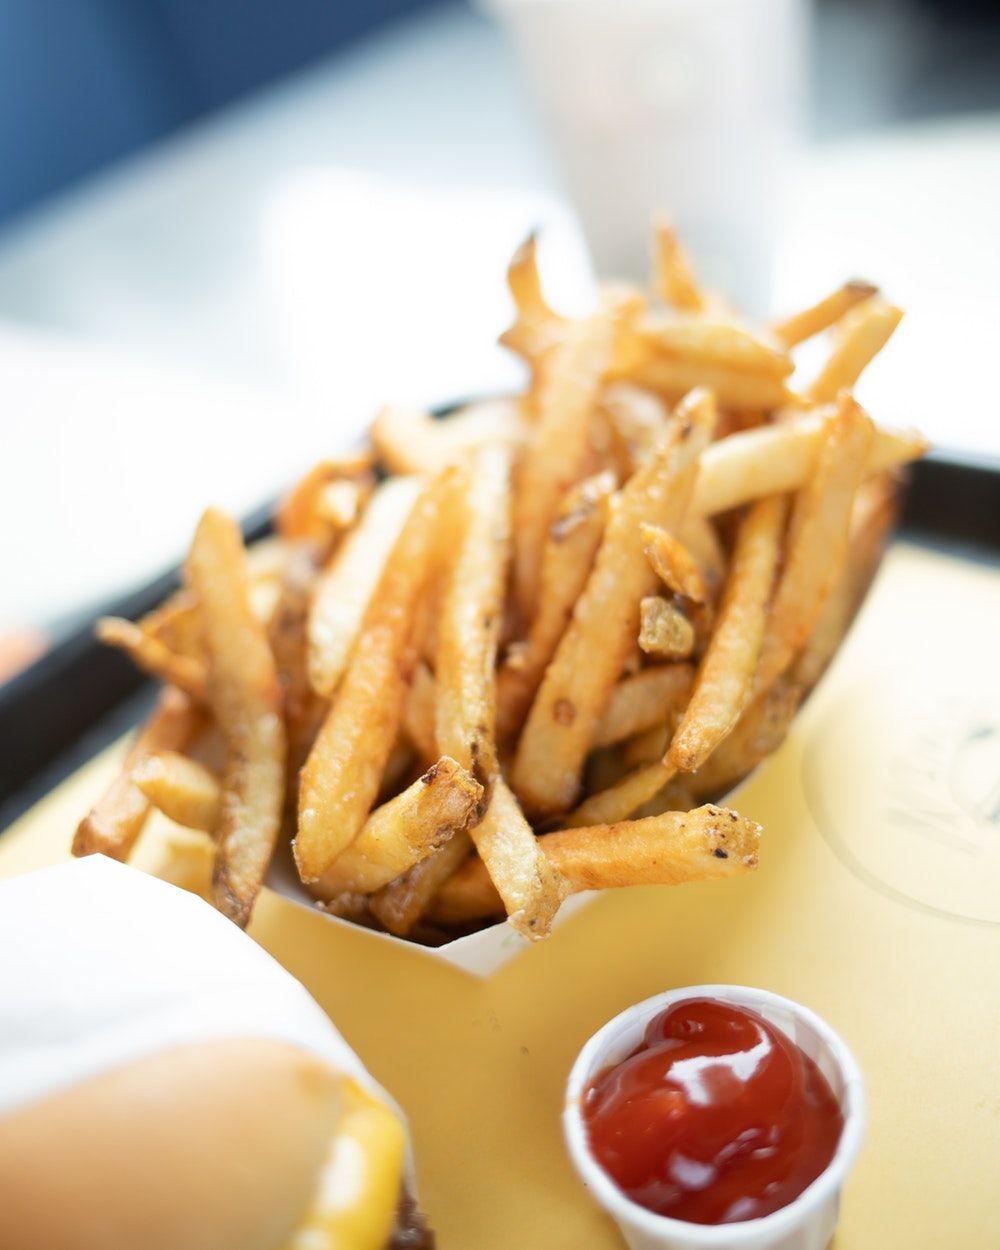 Fries Picture. Download Free Image